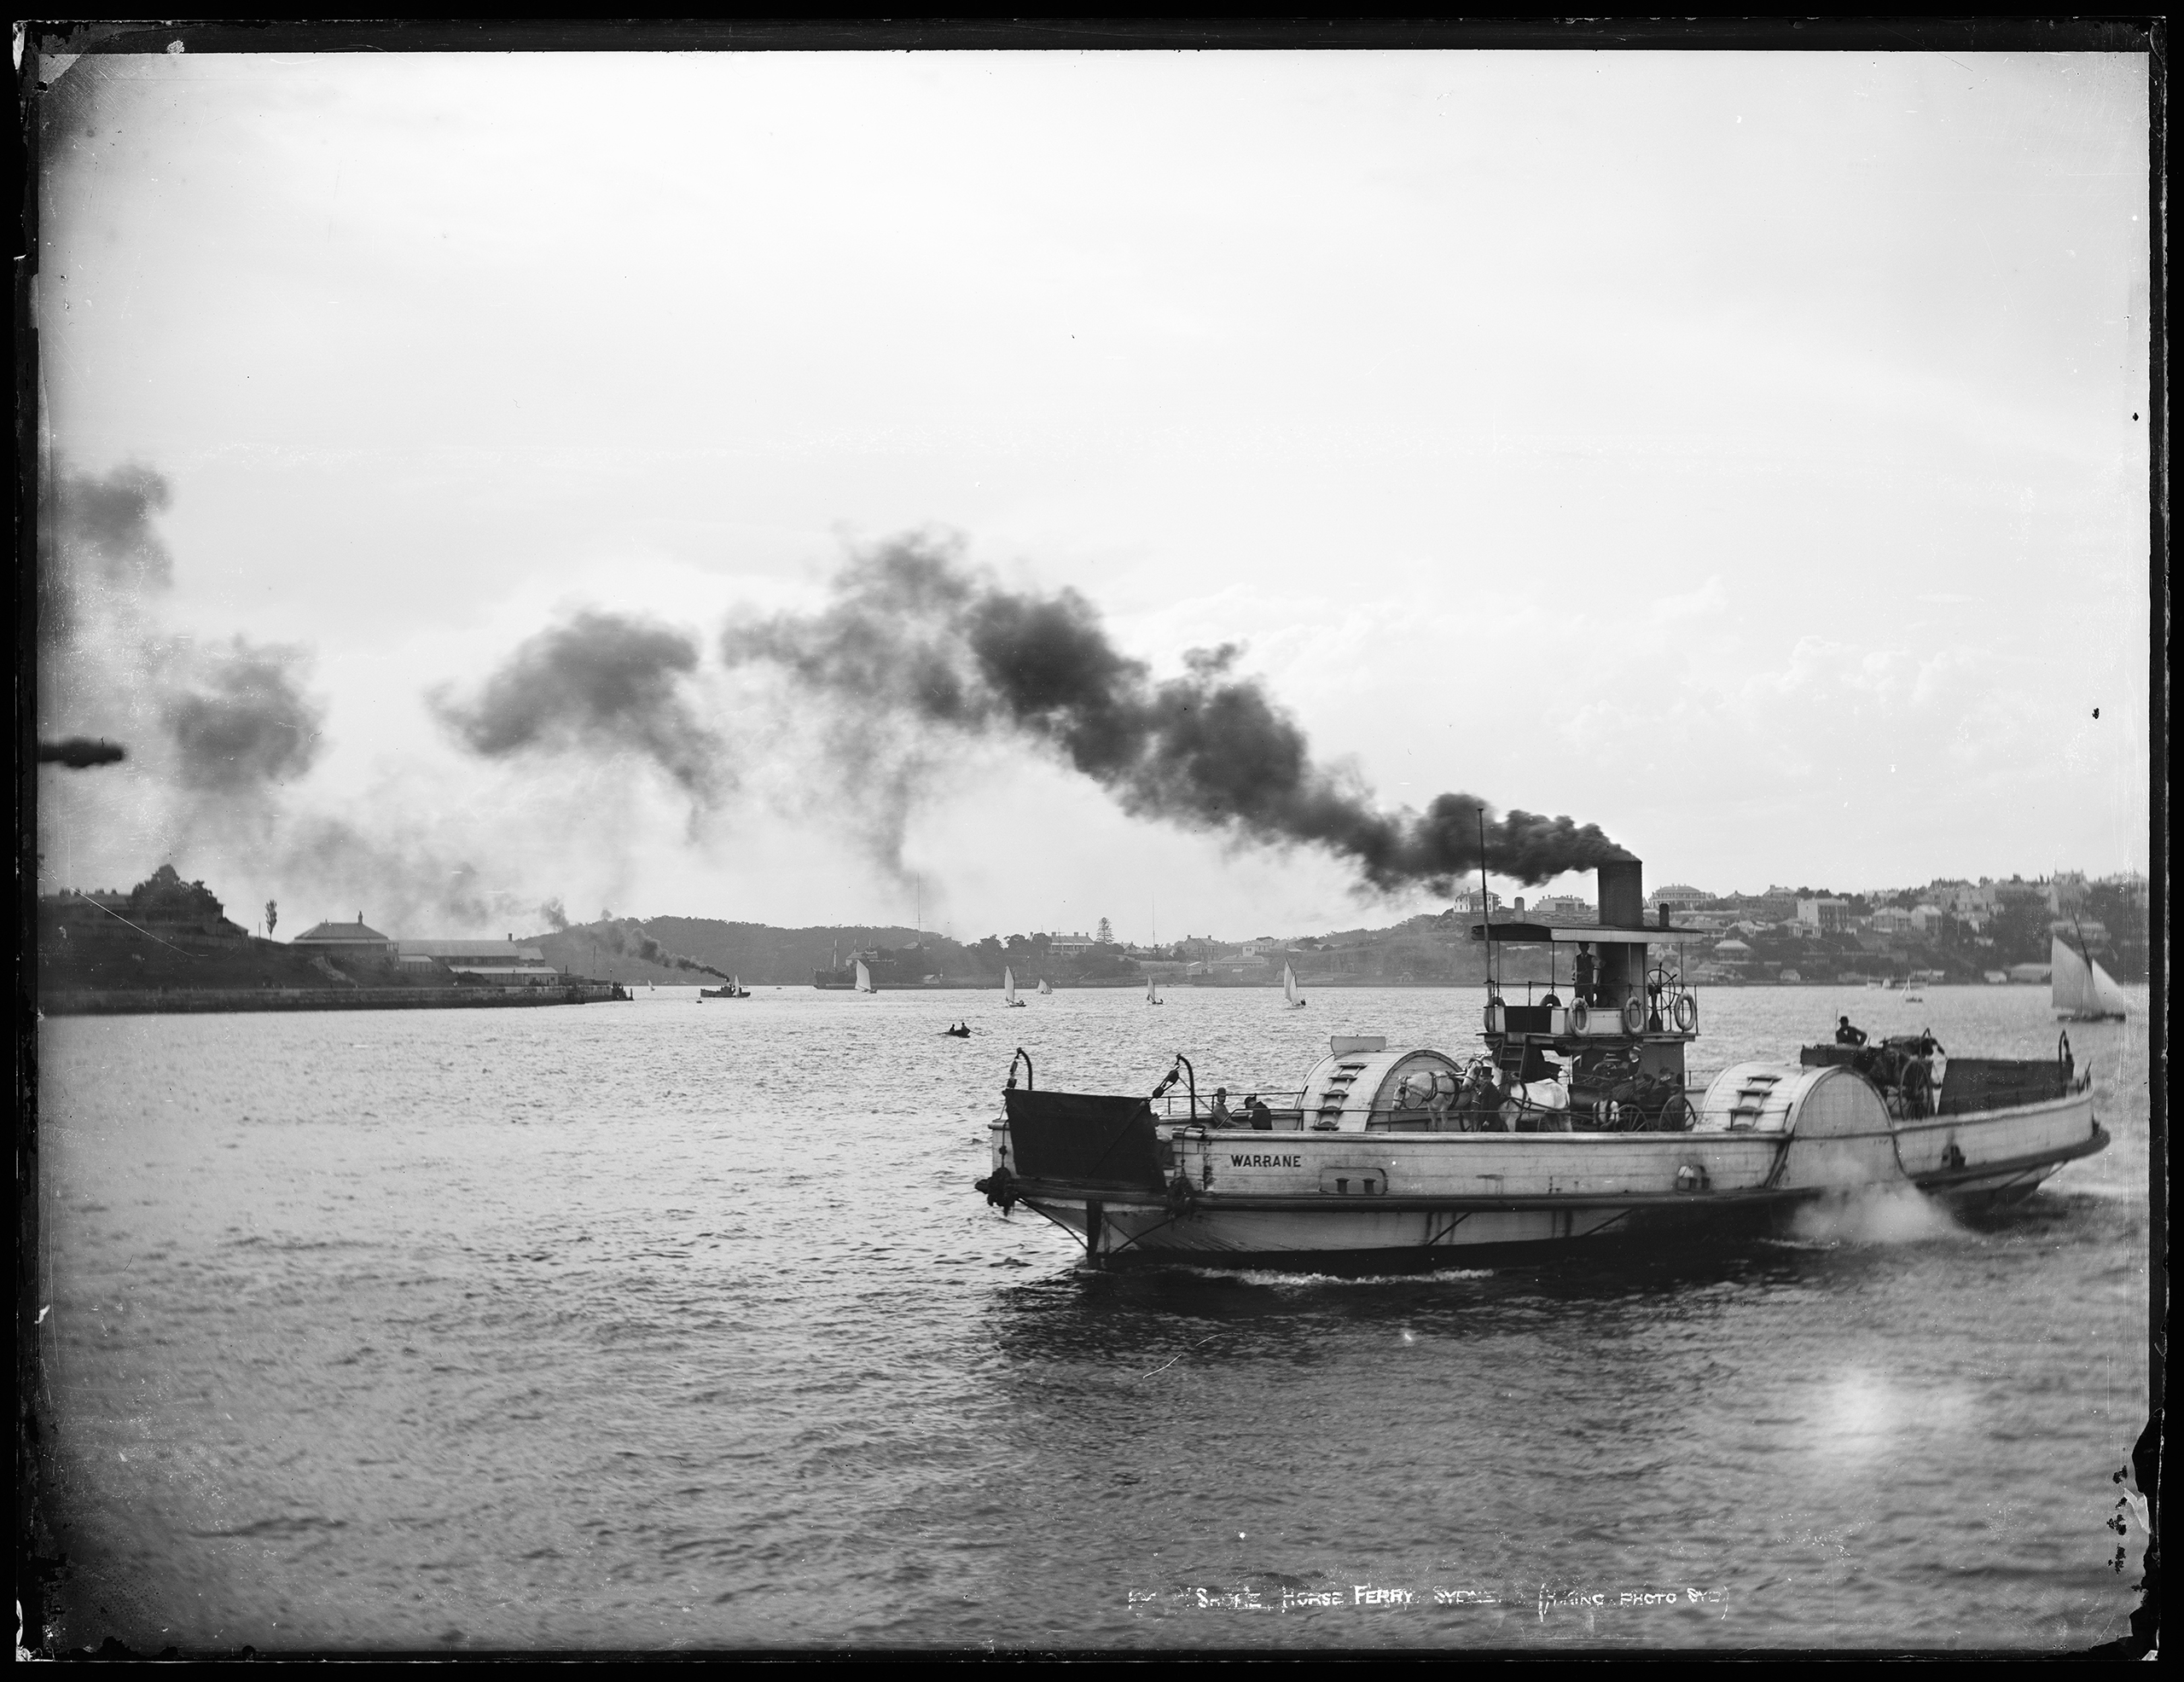 Glass plate negative of steam paddle vehicular ferry (horse ferry) 'Warrane' on Sydney Harbour, c.1900